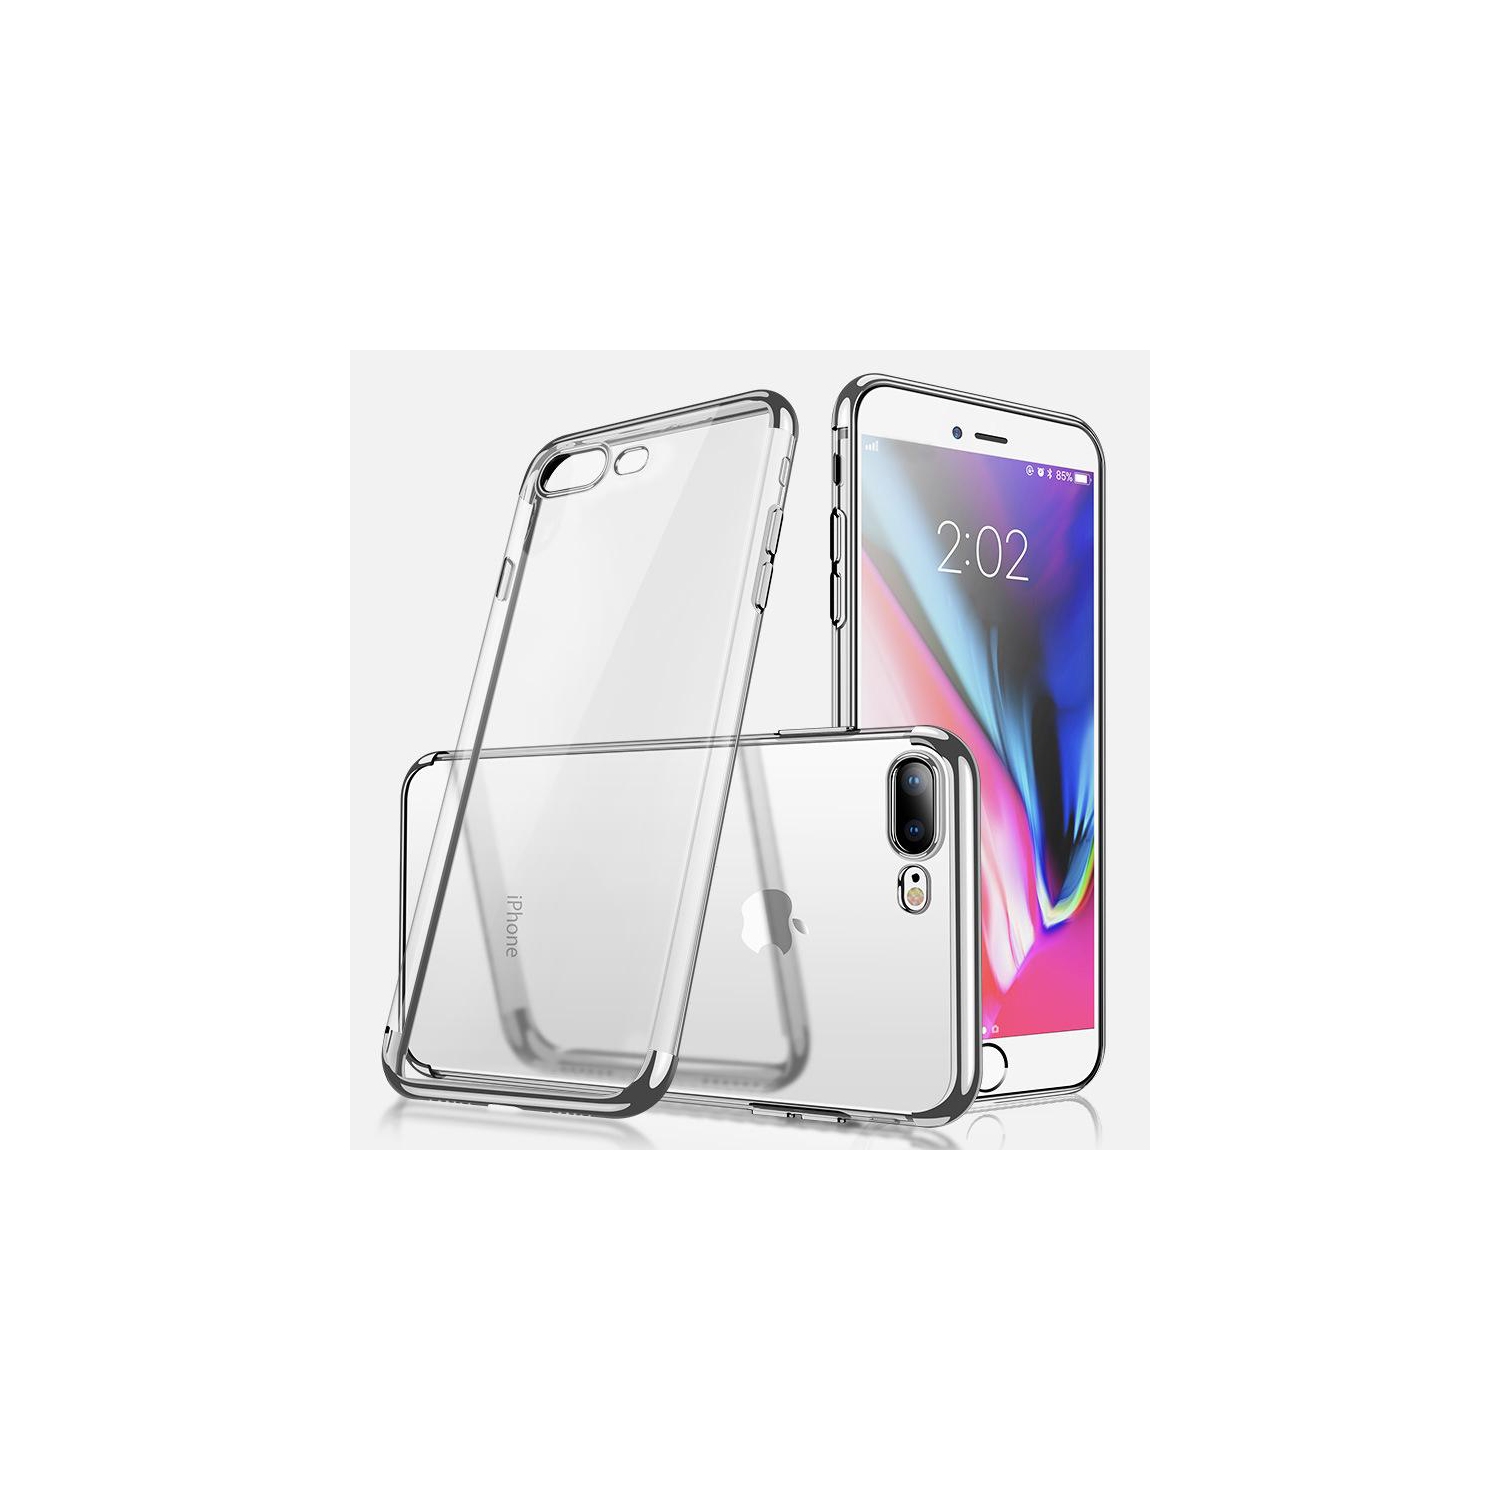 PANDACO Silver Trim Clear Case for iPhone 7 Plus or iPhone 8 Plus